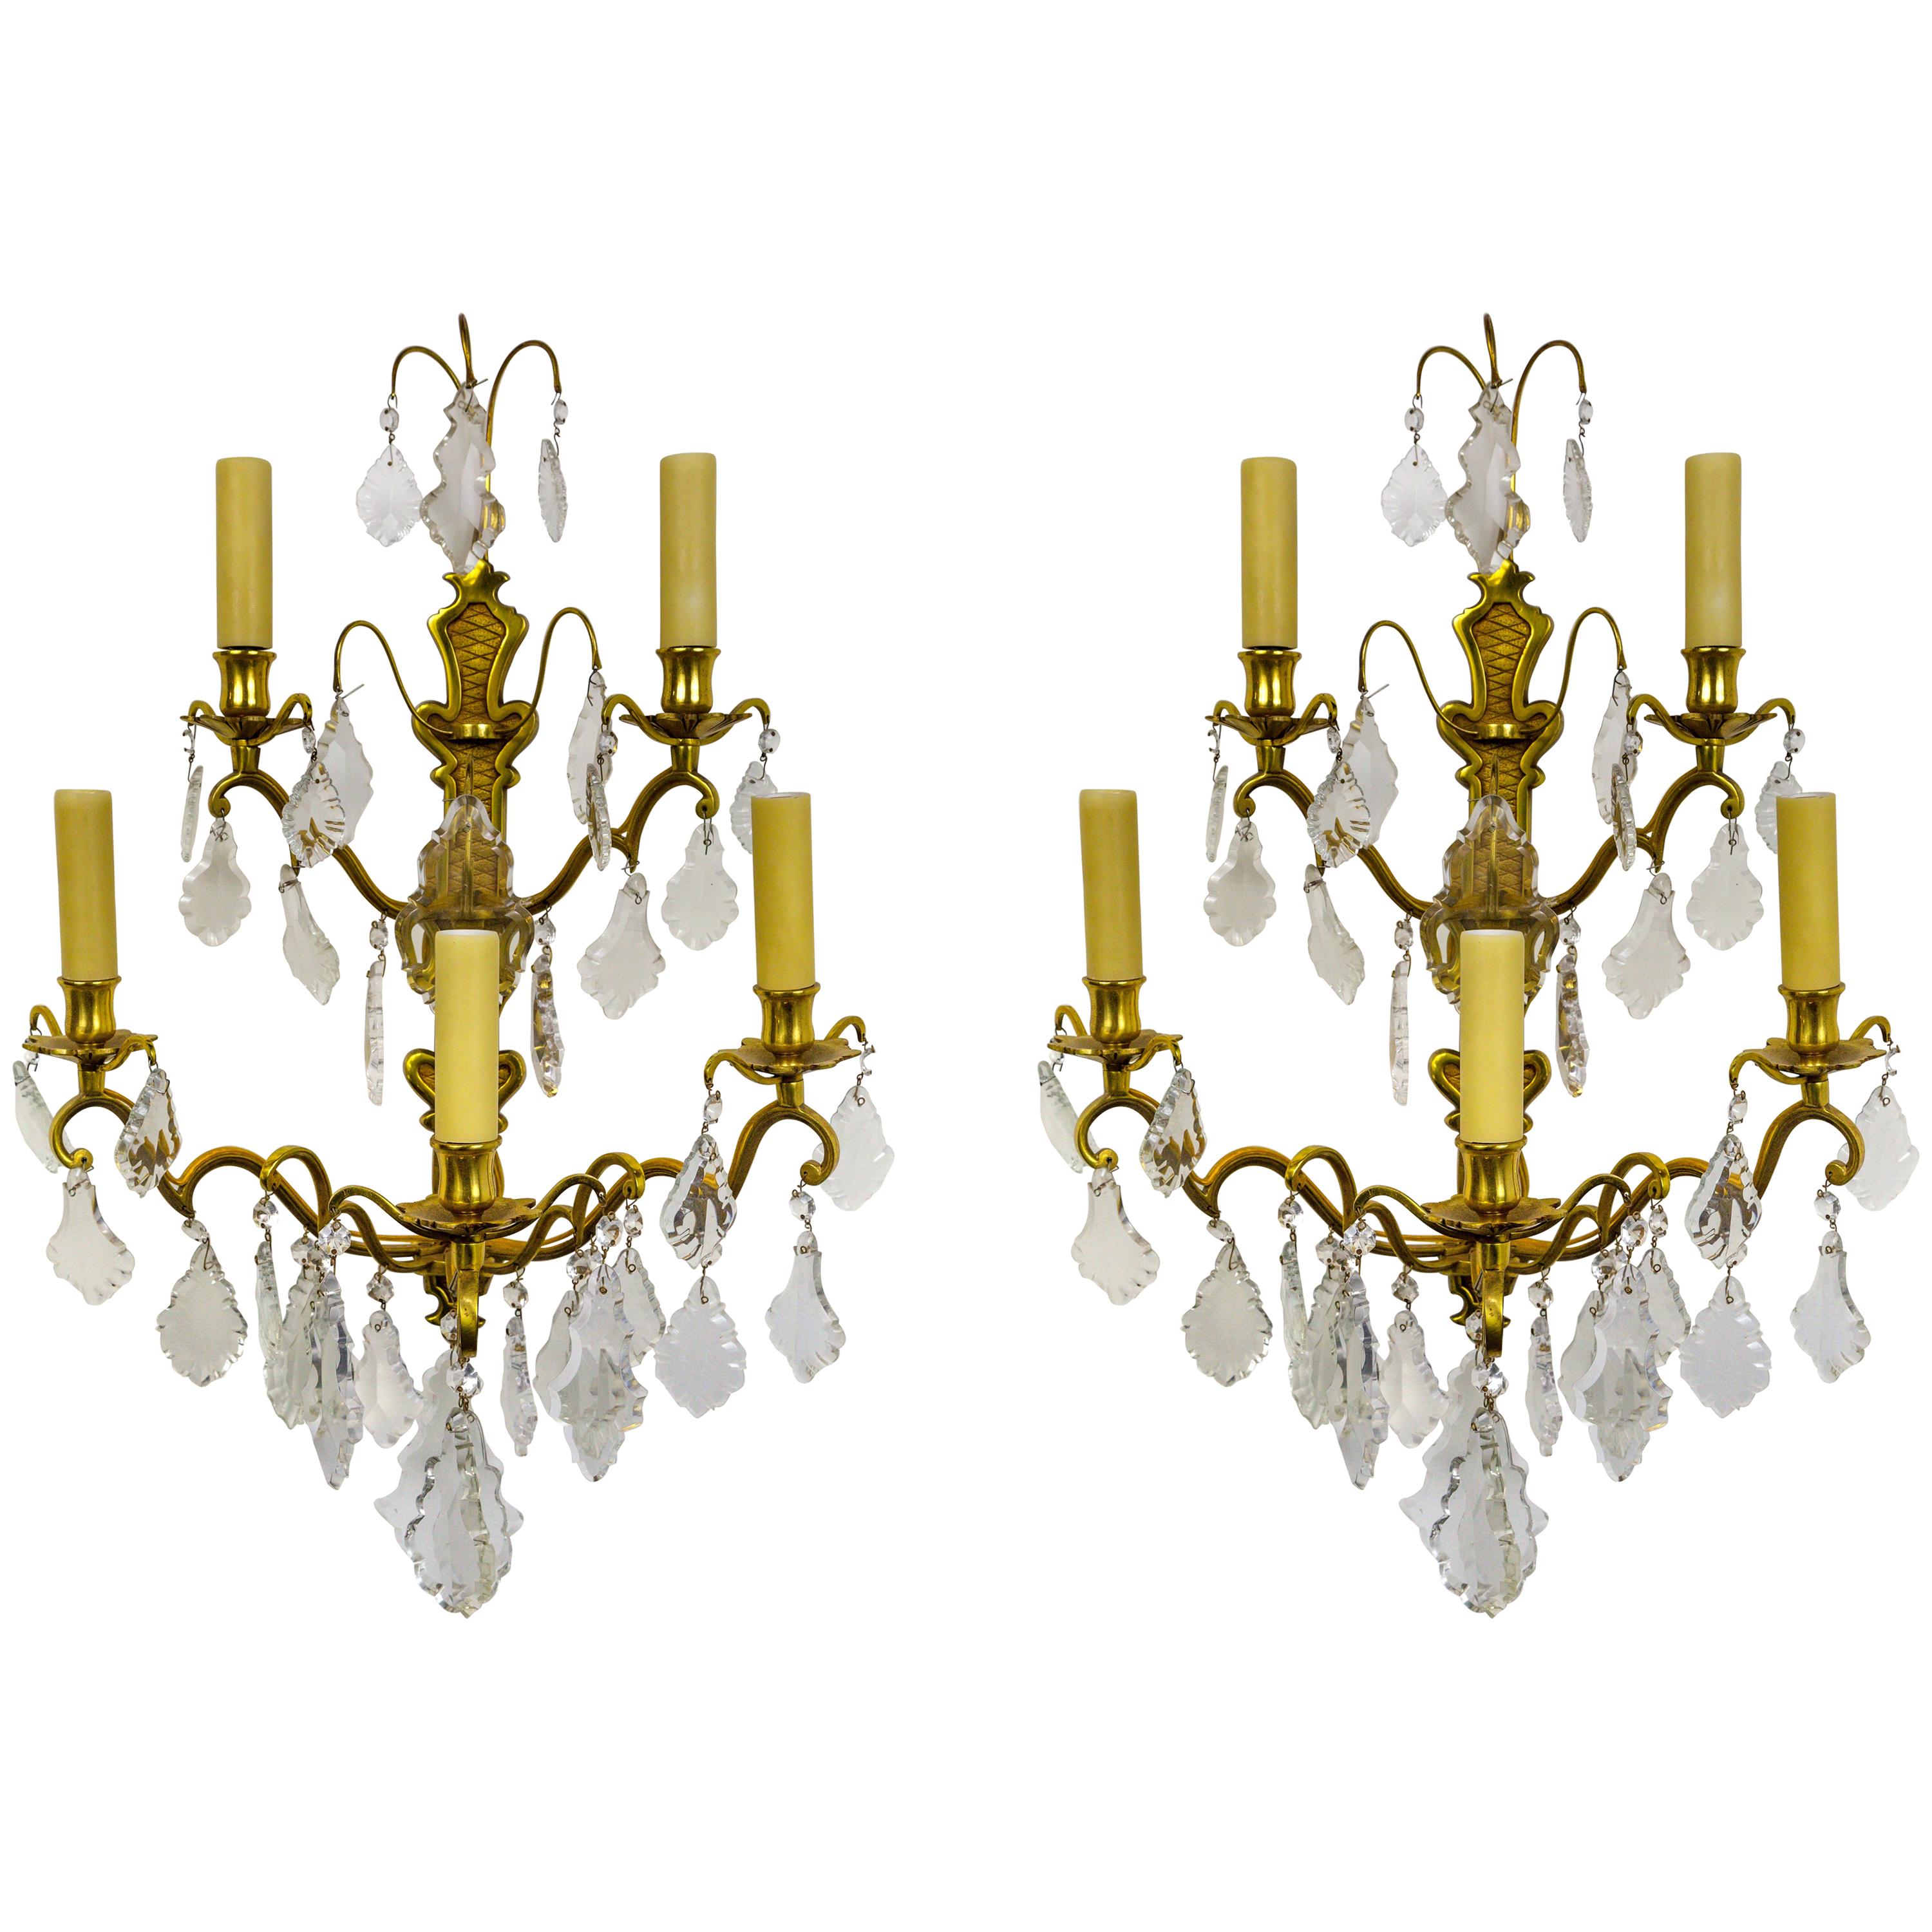 French Double Tier Crystal Candelabra Sconces, Sold Individually